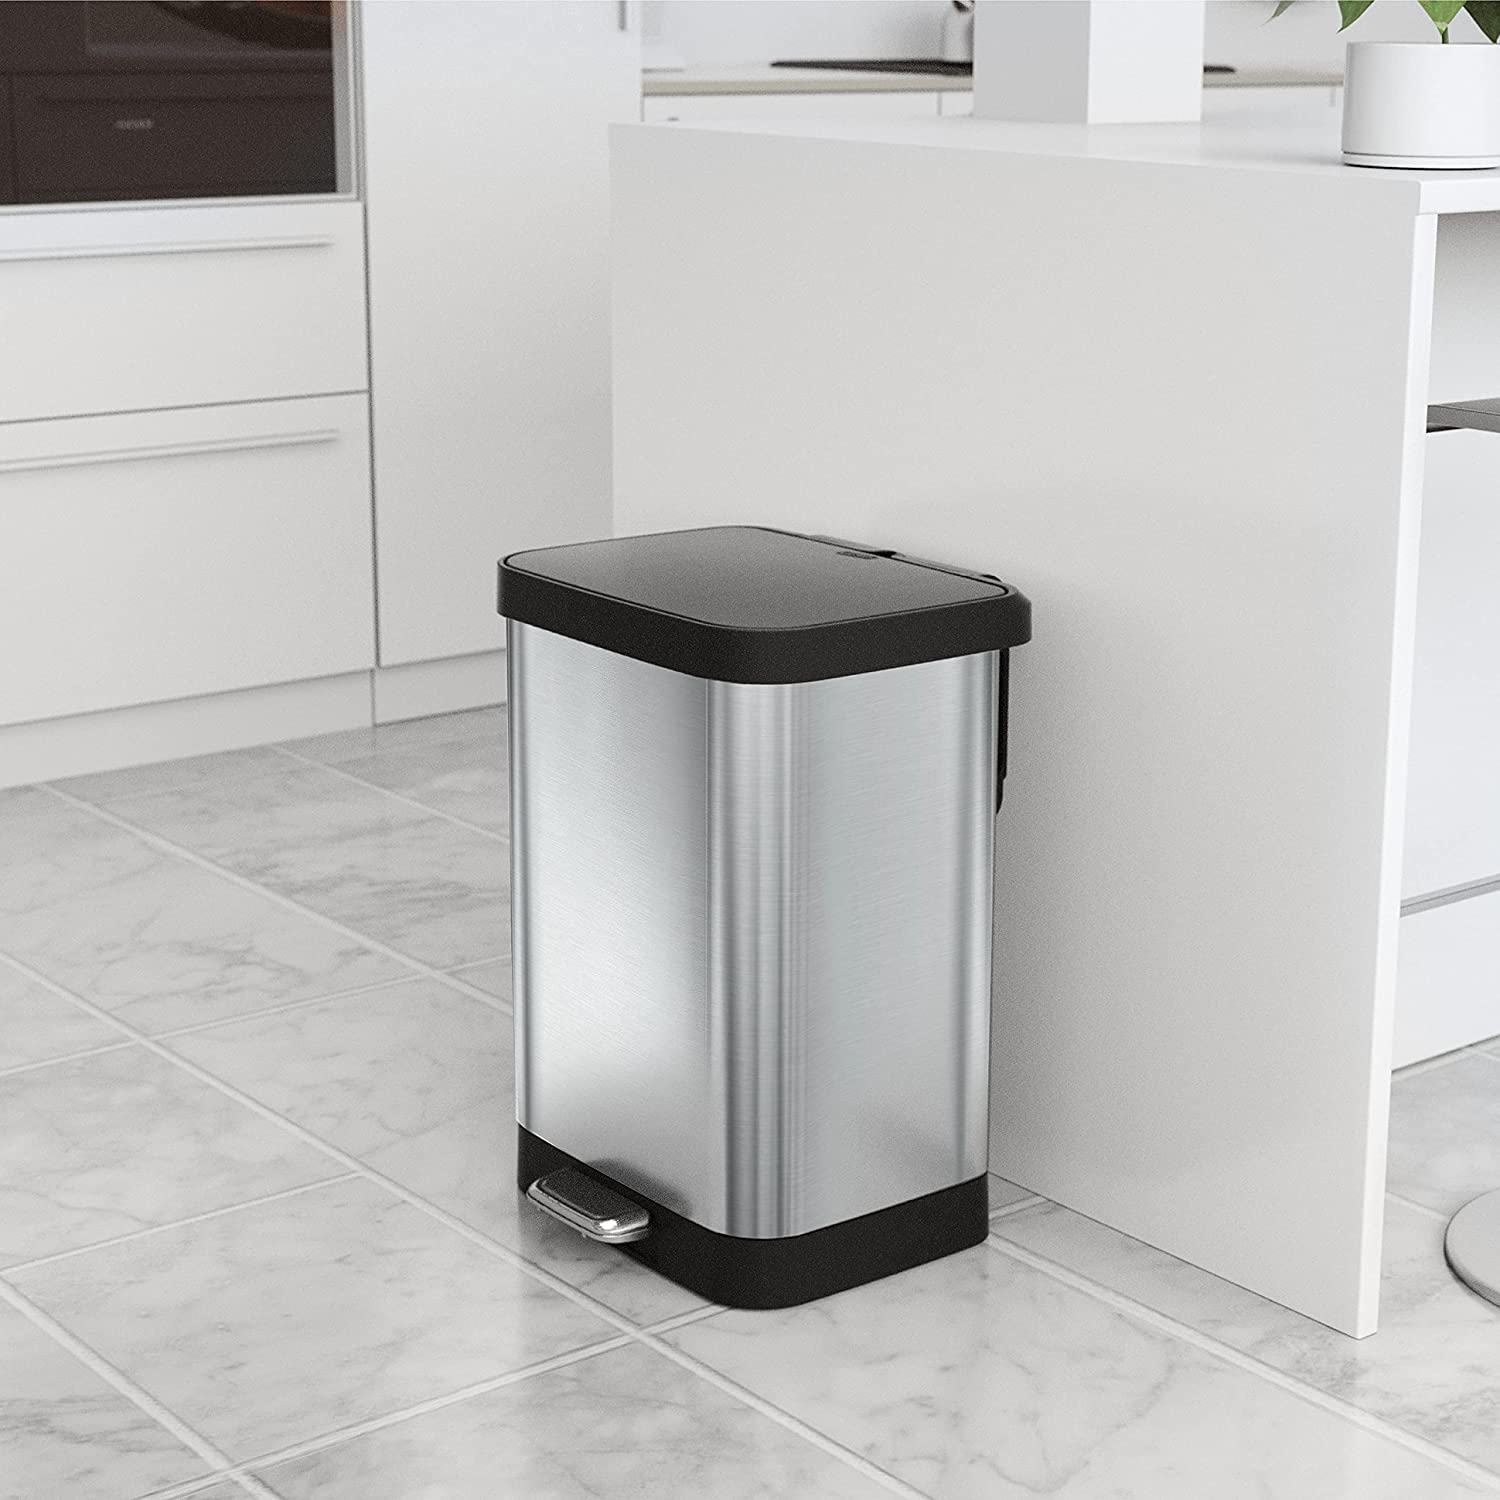 Glad Stainless Steel Step Trash Can with Clorox Odor Indonesia